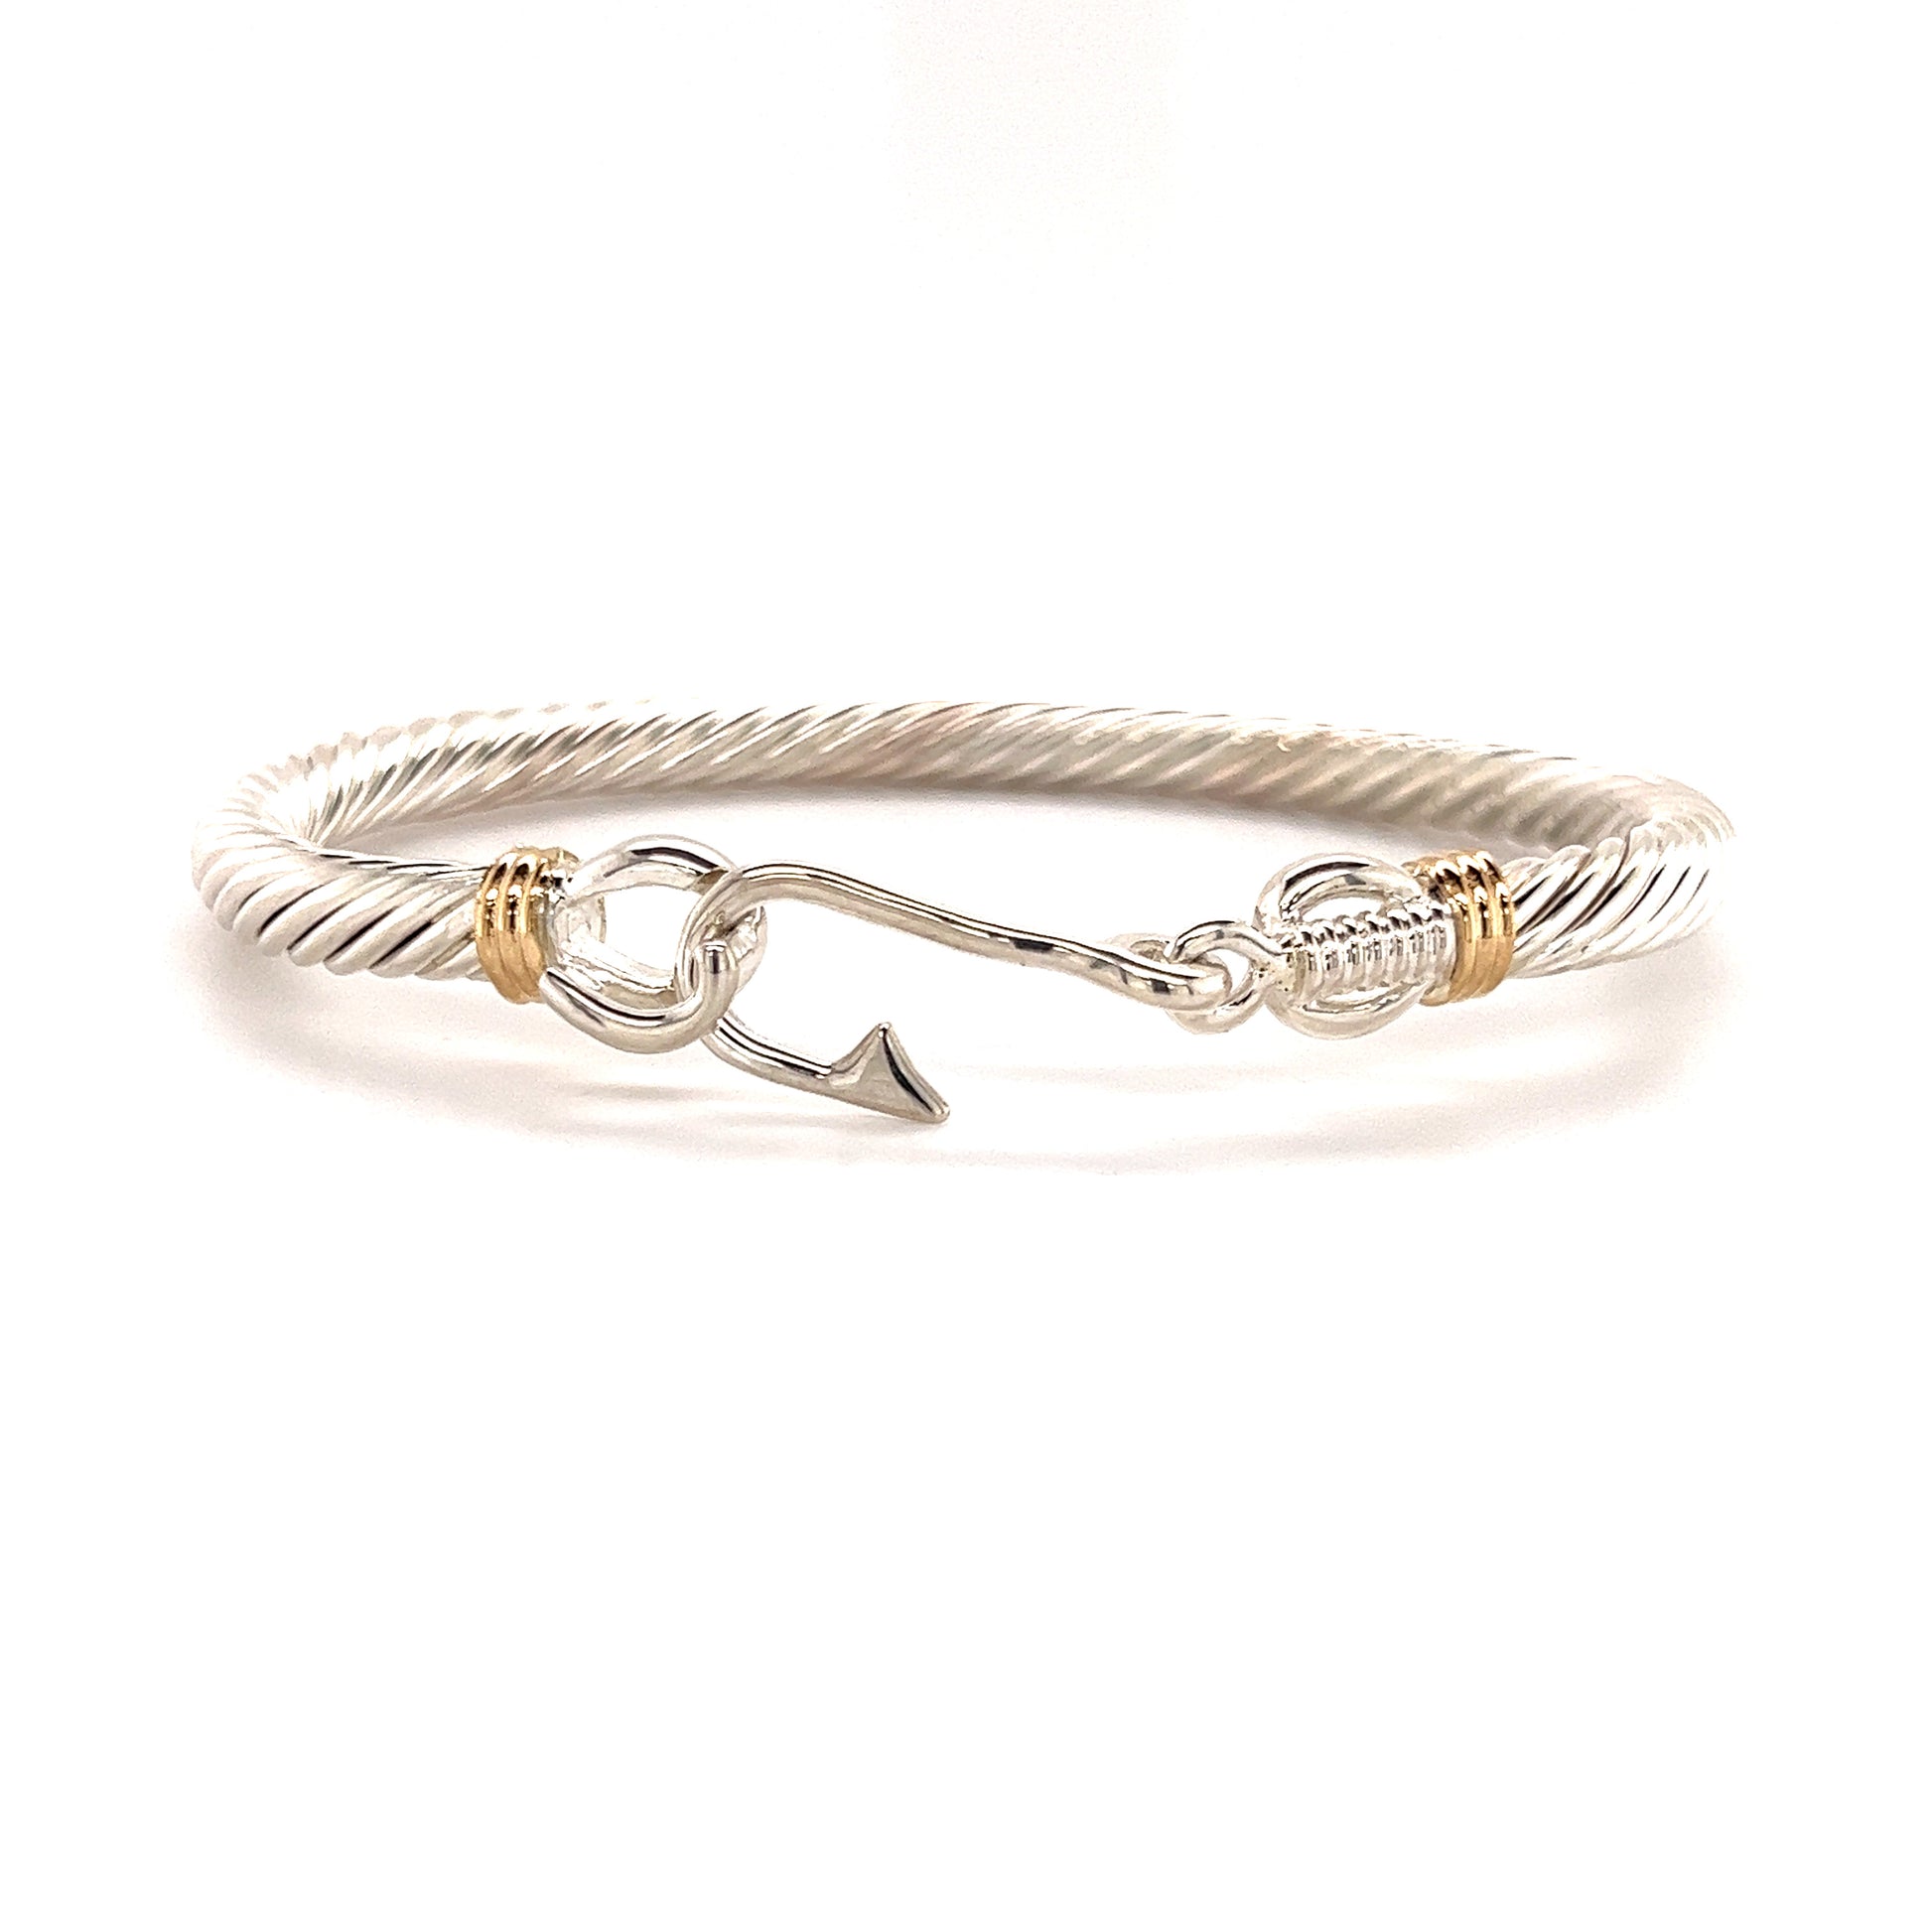 Fish Hook Cable 5mm Bangle Bracelet with 14K Wraps in Sterling Silver Front View